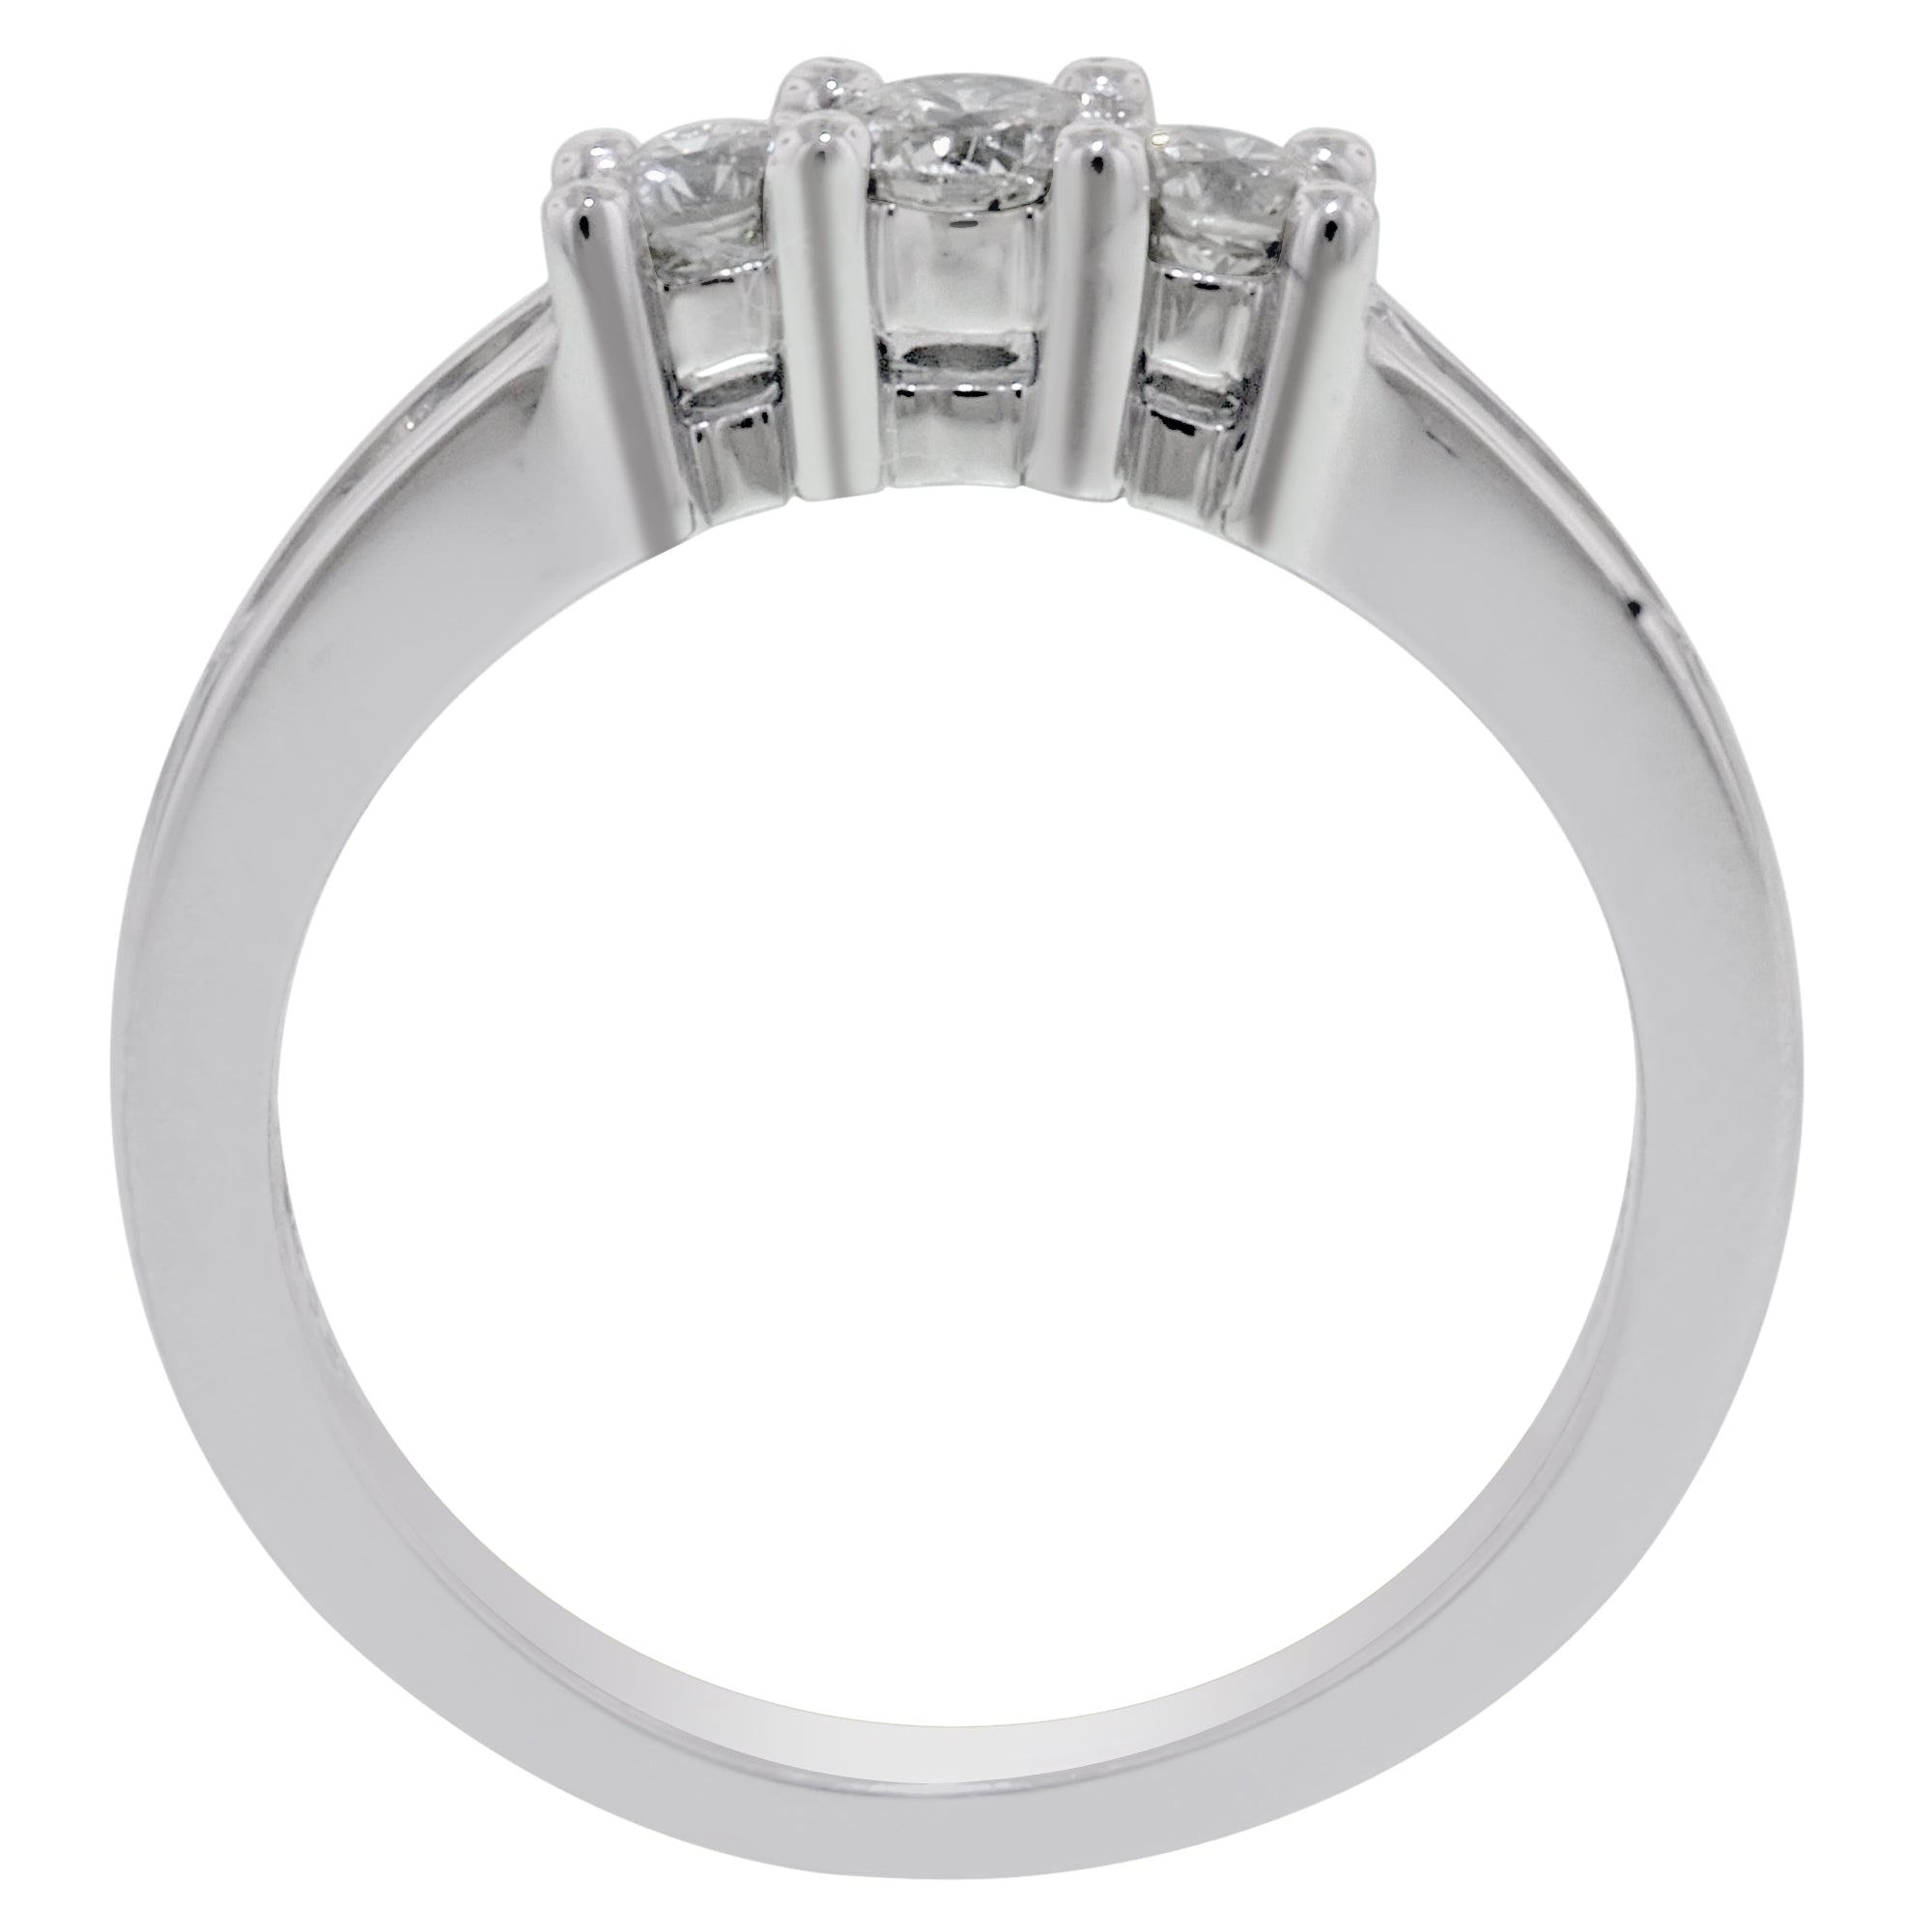 Northern Star Diamond Three Stone Ring in 14kt White Gold with Channel Set Diamonds (1/2ct tw)